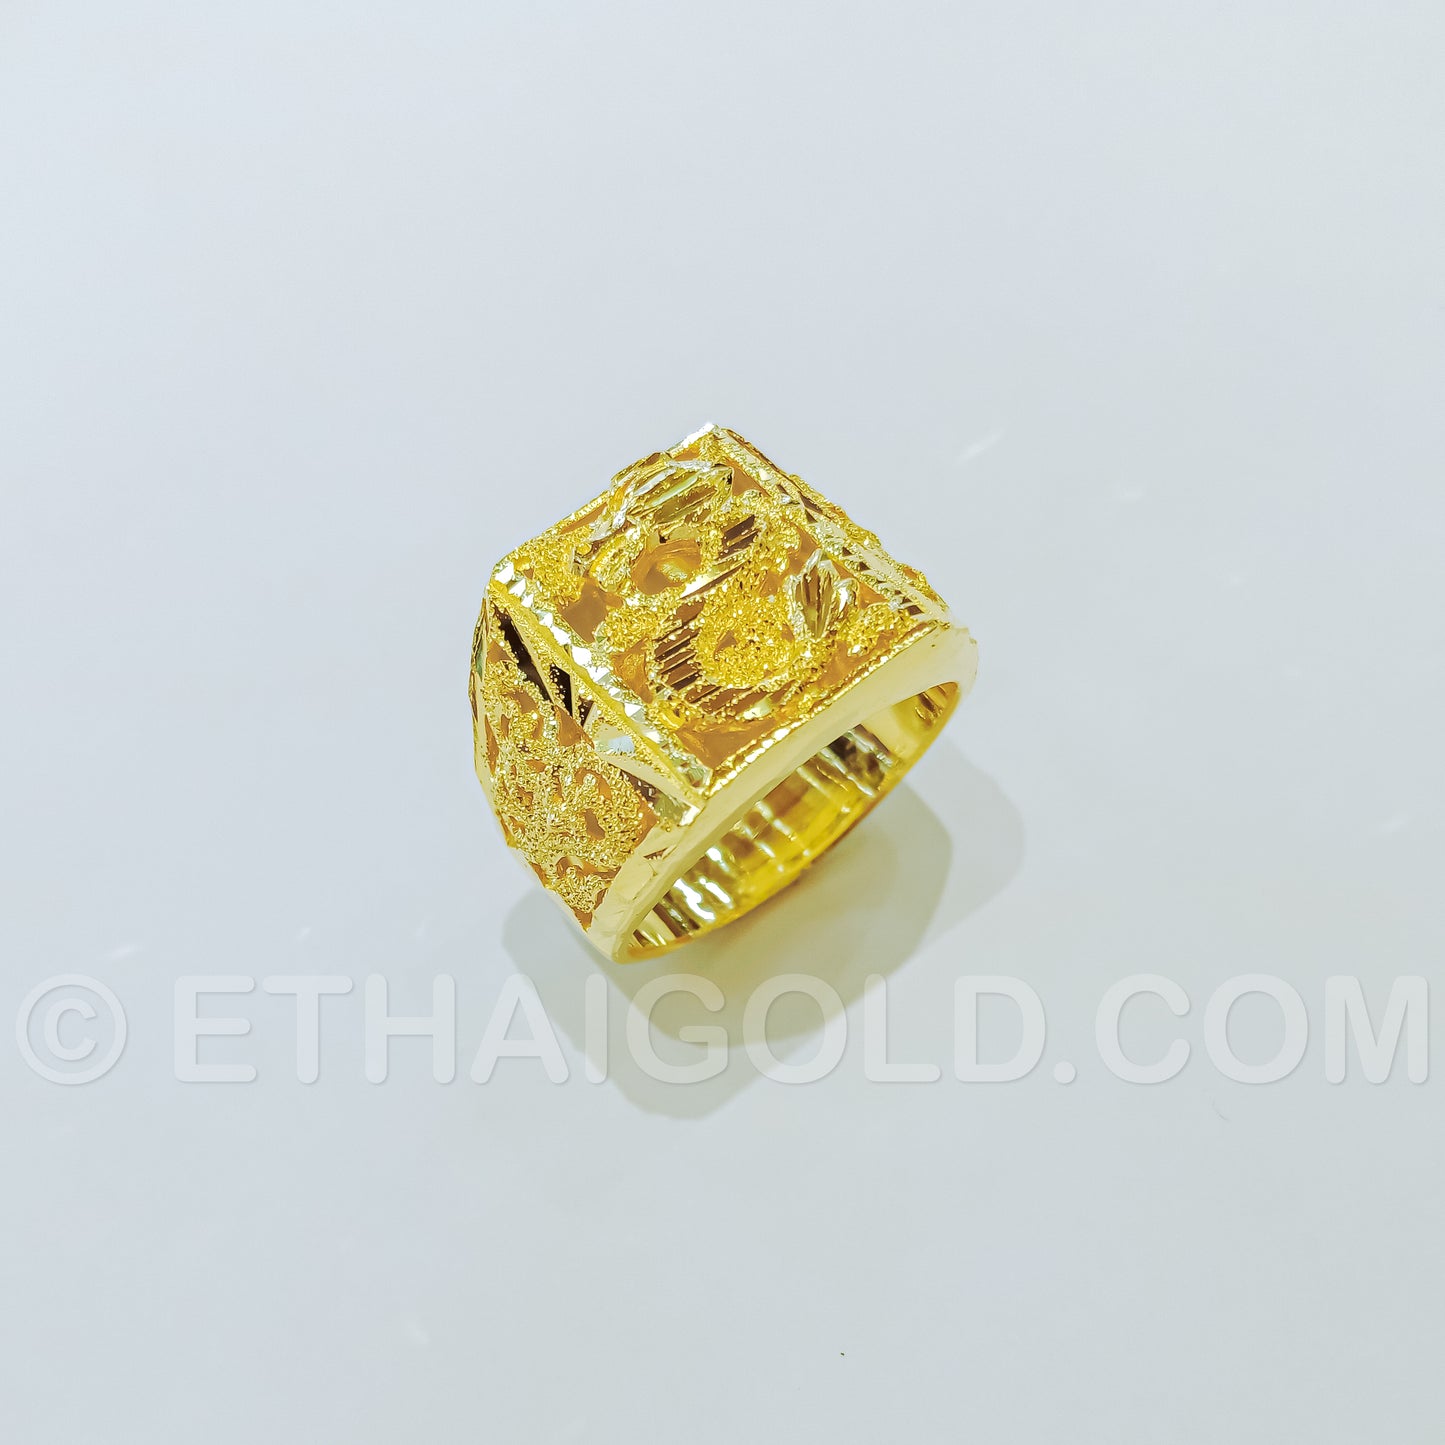 1/4 BAHT POLISHED SPARKLING DIAMOND-CUT SOLID SQUARE DRAGON RING IN 23K GOLD (ID: R1201S)